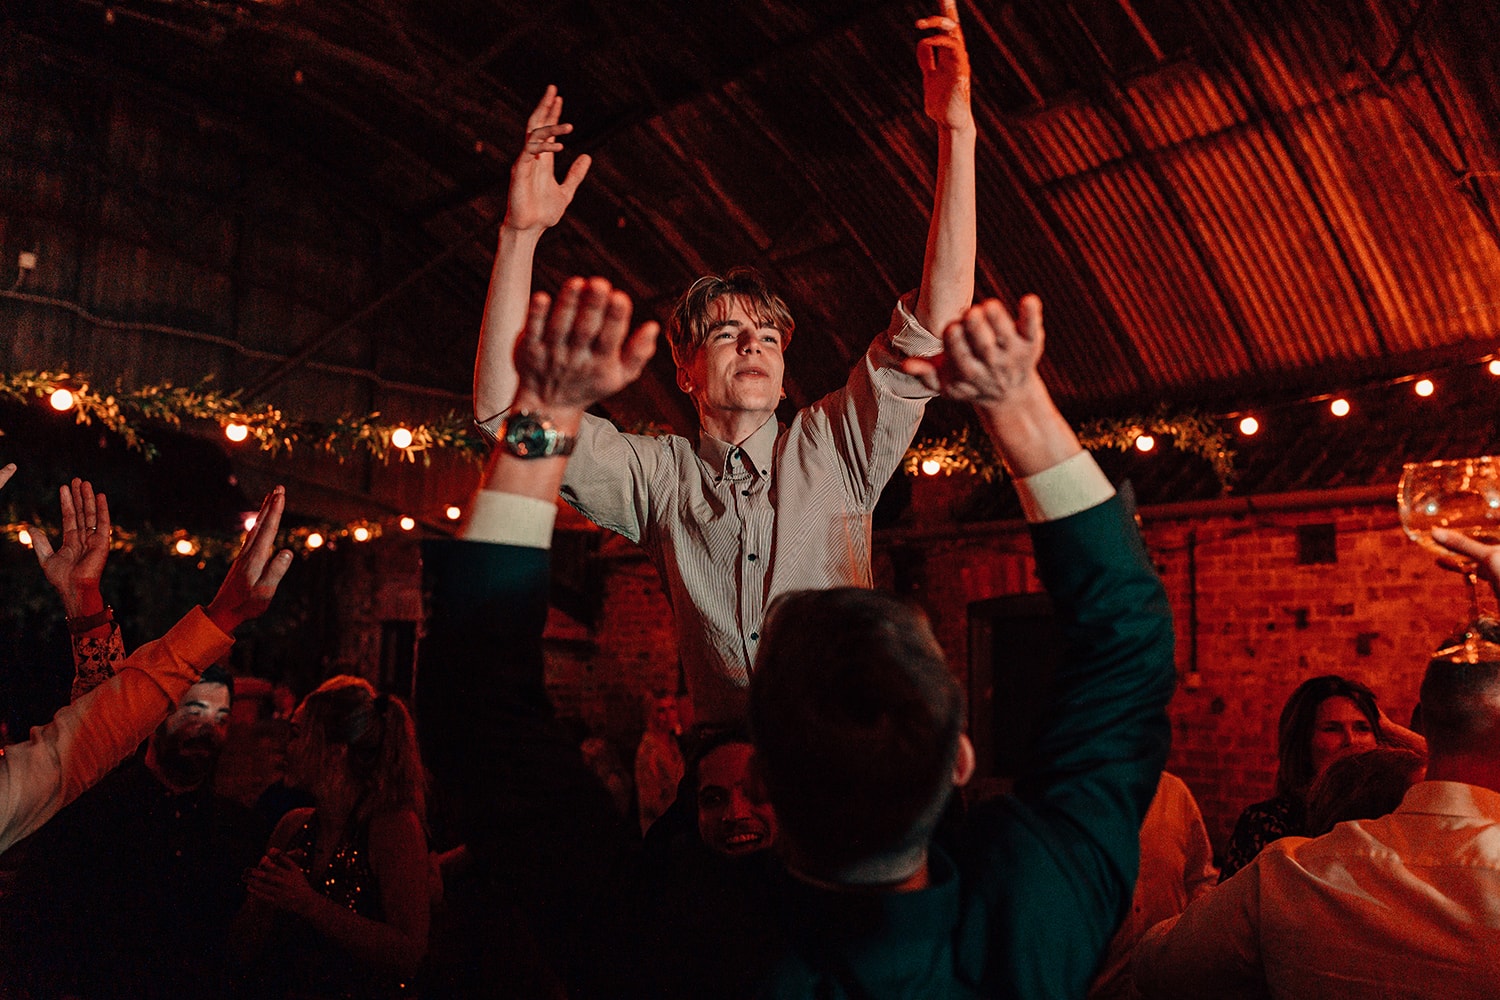 Male wedding guest partying hard and being lifted up on friends shoulders